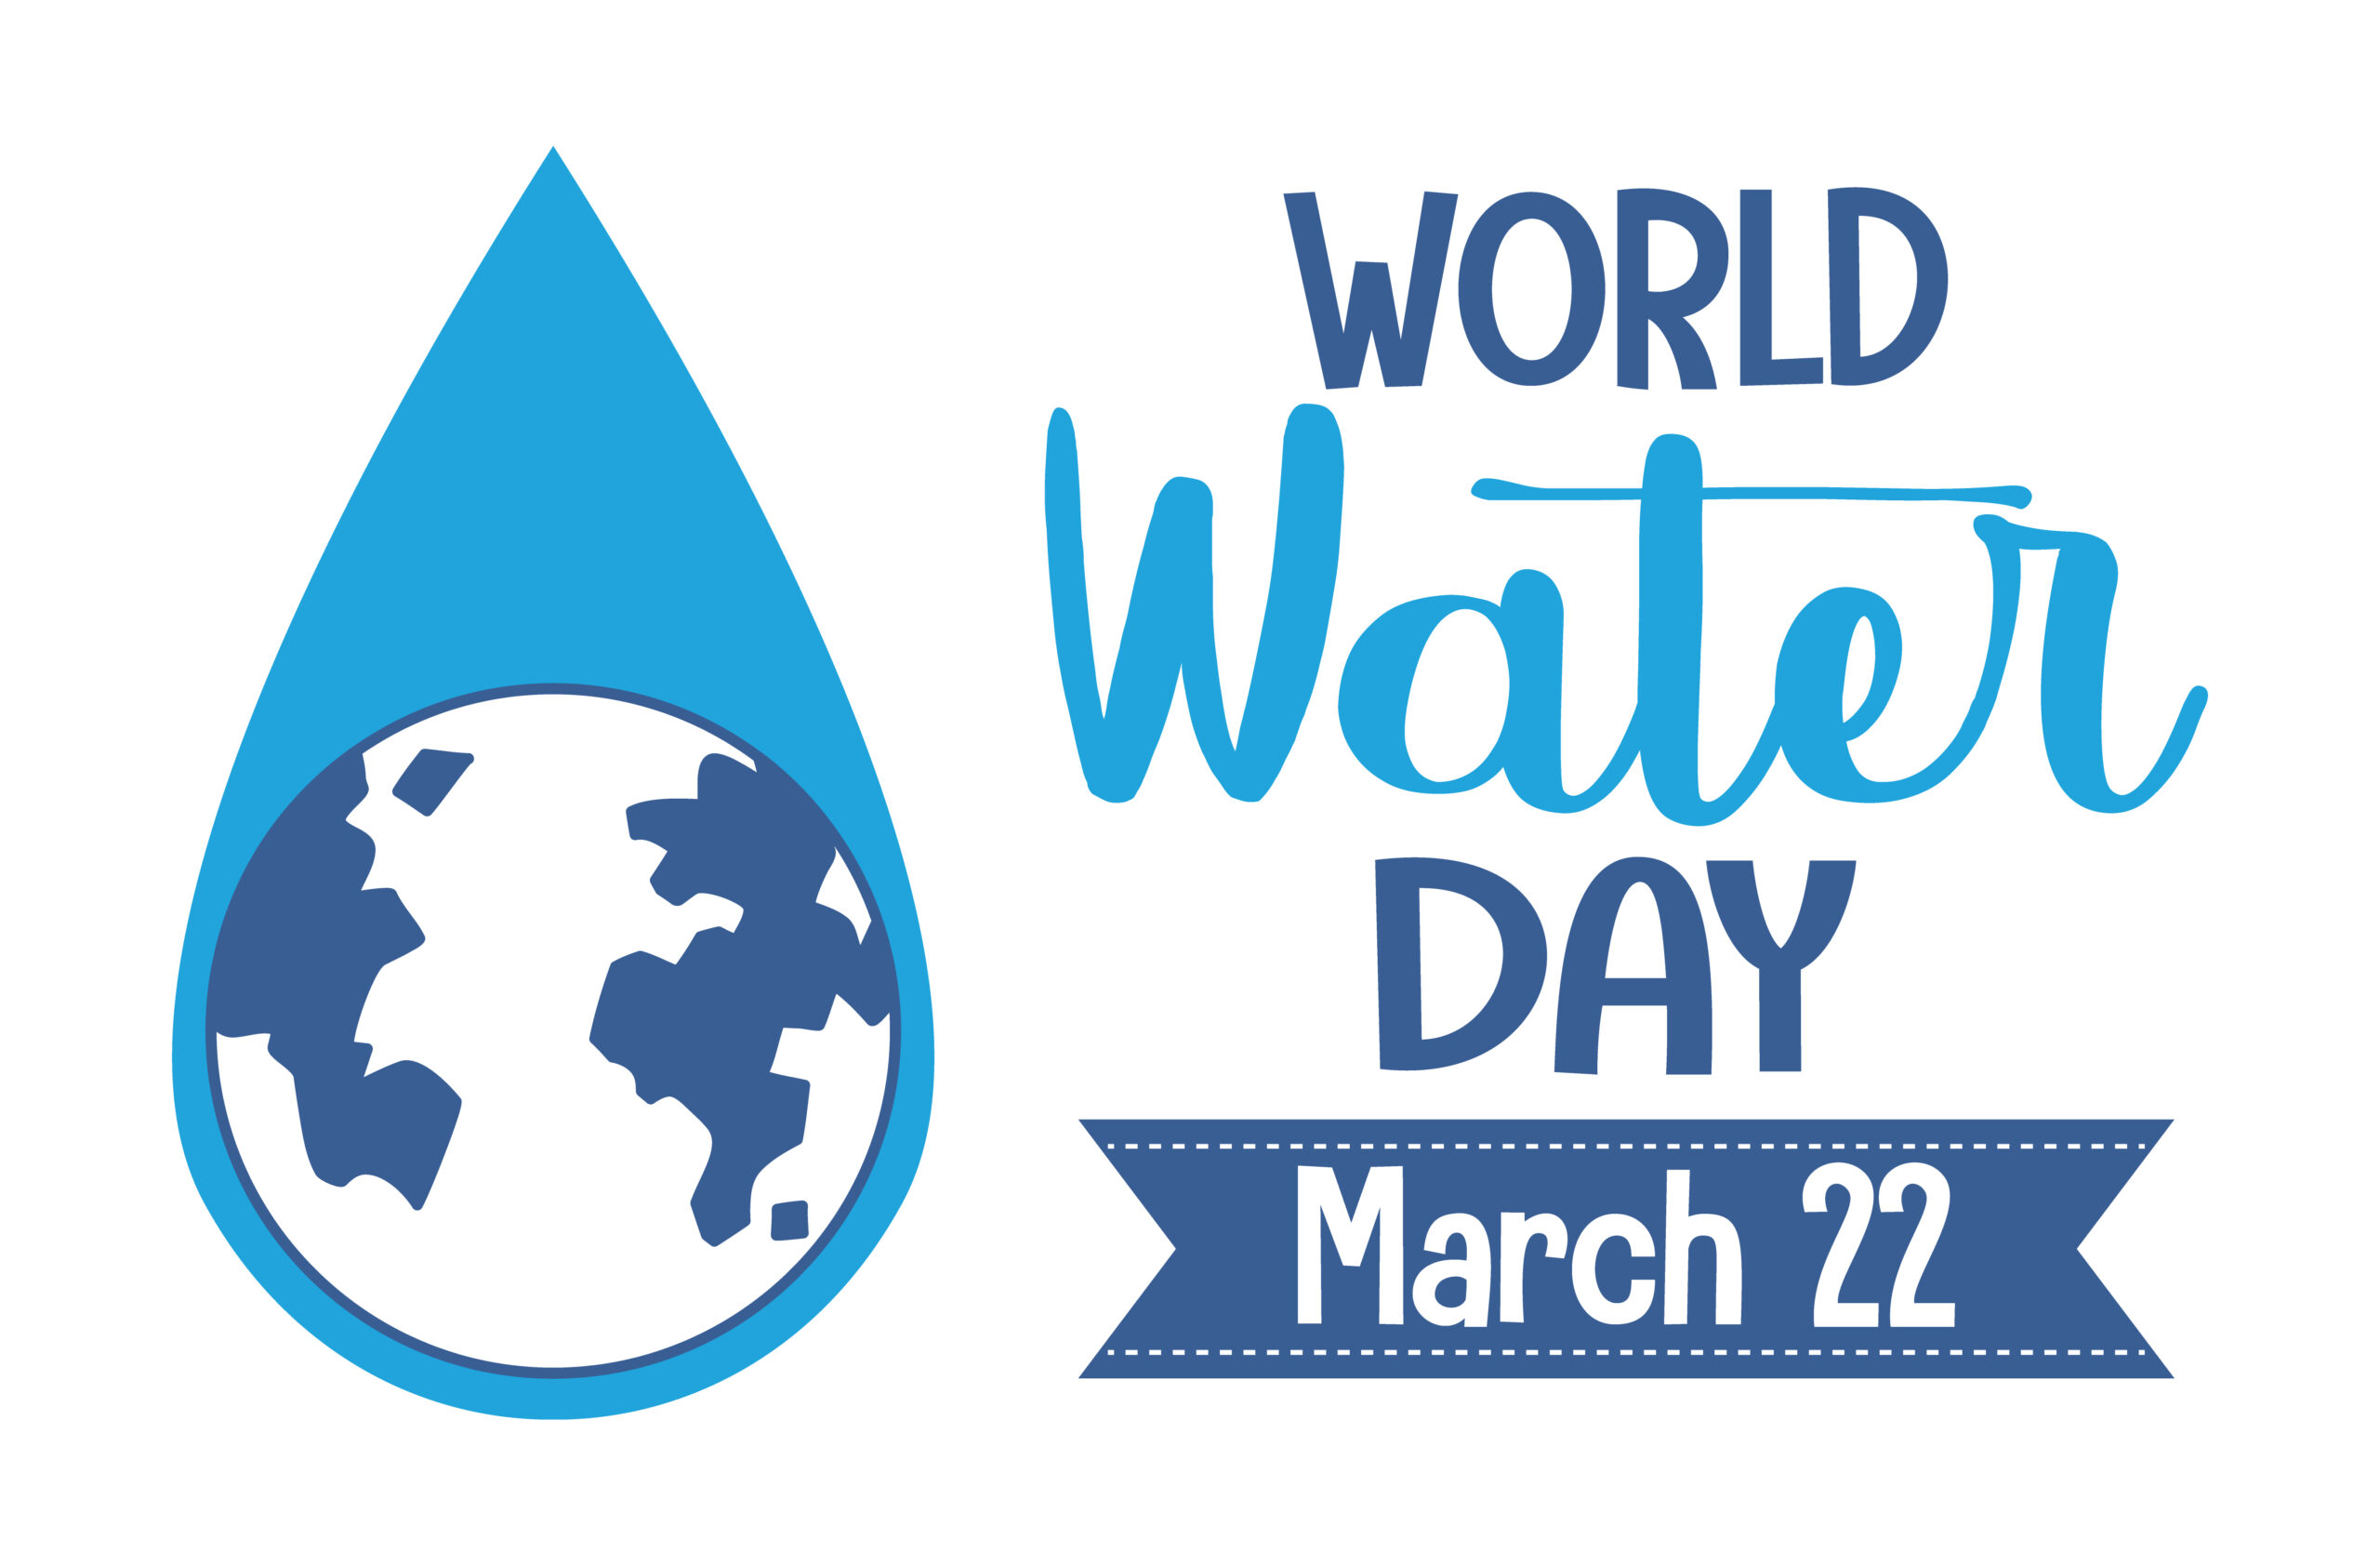 Celebrate World Water Day with a Splash!